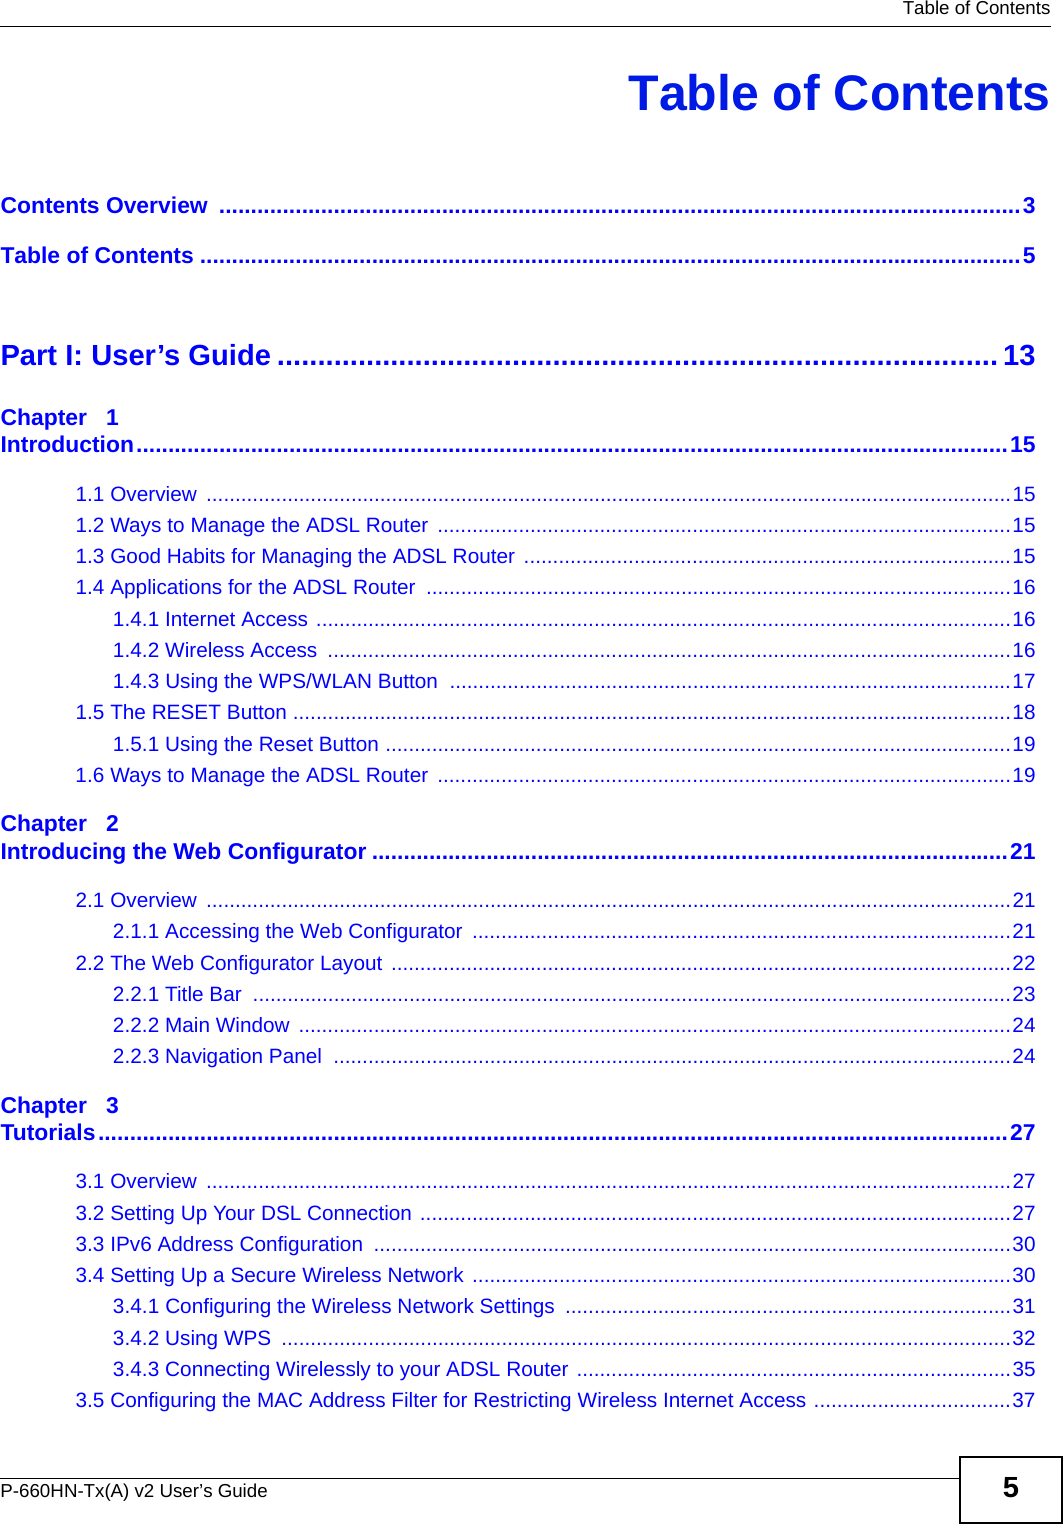   Table of ContentsP-660HN-Tx(A) v2 User’s Guide 5Table of ContentsContents Overview  ..............................................................................................................................3Table of Contents .................................................................................................................................5Part I: User’s Guide ......................................................................................... 13Chapter   1Introduction.........................................................................................................................................151.1 Overview  ...........................................................................................................................................151.2 Ways to Manage the ADSL Router  ...................................................................................................151.3 Good Habits for Managing the ADSL Router  ....................................................................................151.4 Applications for the ADSL Router .....................................................................................................161.4.1 Internet Access ........................................................................................................................161.4.2 Wireless Access  ......................................................................................................................161.4.3 Using the WPS/WLAN Button  .................................................................................................171.5 The RESET Button ............................................................................................................................181.5.1 Using the Reset Button ............................................................................................................191.6 Ways to Manage the ADSL Router  ...................................................................................................19Chapter   2Introducing the Web Configurator ....................................................................................................212.1 Overview  ...........................................................................................................................................212.1.1 Accessing the Web Configurator  .............................................................................................212.2 The Web Configurator Layout ...........................................................................................................222.2.1 Title Bar  ...................................................................................................................................232.2.2 Main Window  ...........................................................................................................................242.2.3 Navigation Panel  .....................................................................................................................24Chapter   3Tutorials...............................................................................................................................................273.1 Overview  ...........................................................................................................................................273.2 Setting Up Your DSL Connection ......................................................................................................273.3 IPv6 Address Configuration  ..............................................................................................................303.4 Setting Up a Secure Wireless Network .............................................................................................303.4.1 Configuring the Wireless Network Settings  .............................................................................313.4.2 Using WPS  ..............................................................................................................................323.4.3 Connecting Wirelessly to your ADSL Router ...........................................................................353.5 Configuring the MAC Address Filter for Restricting Wireless Internet Access ..................................37